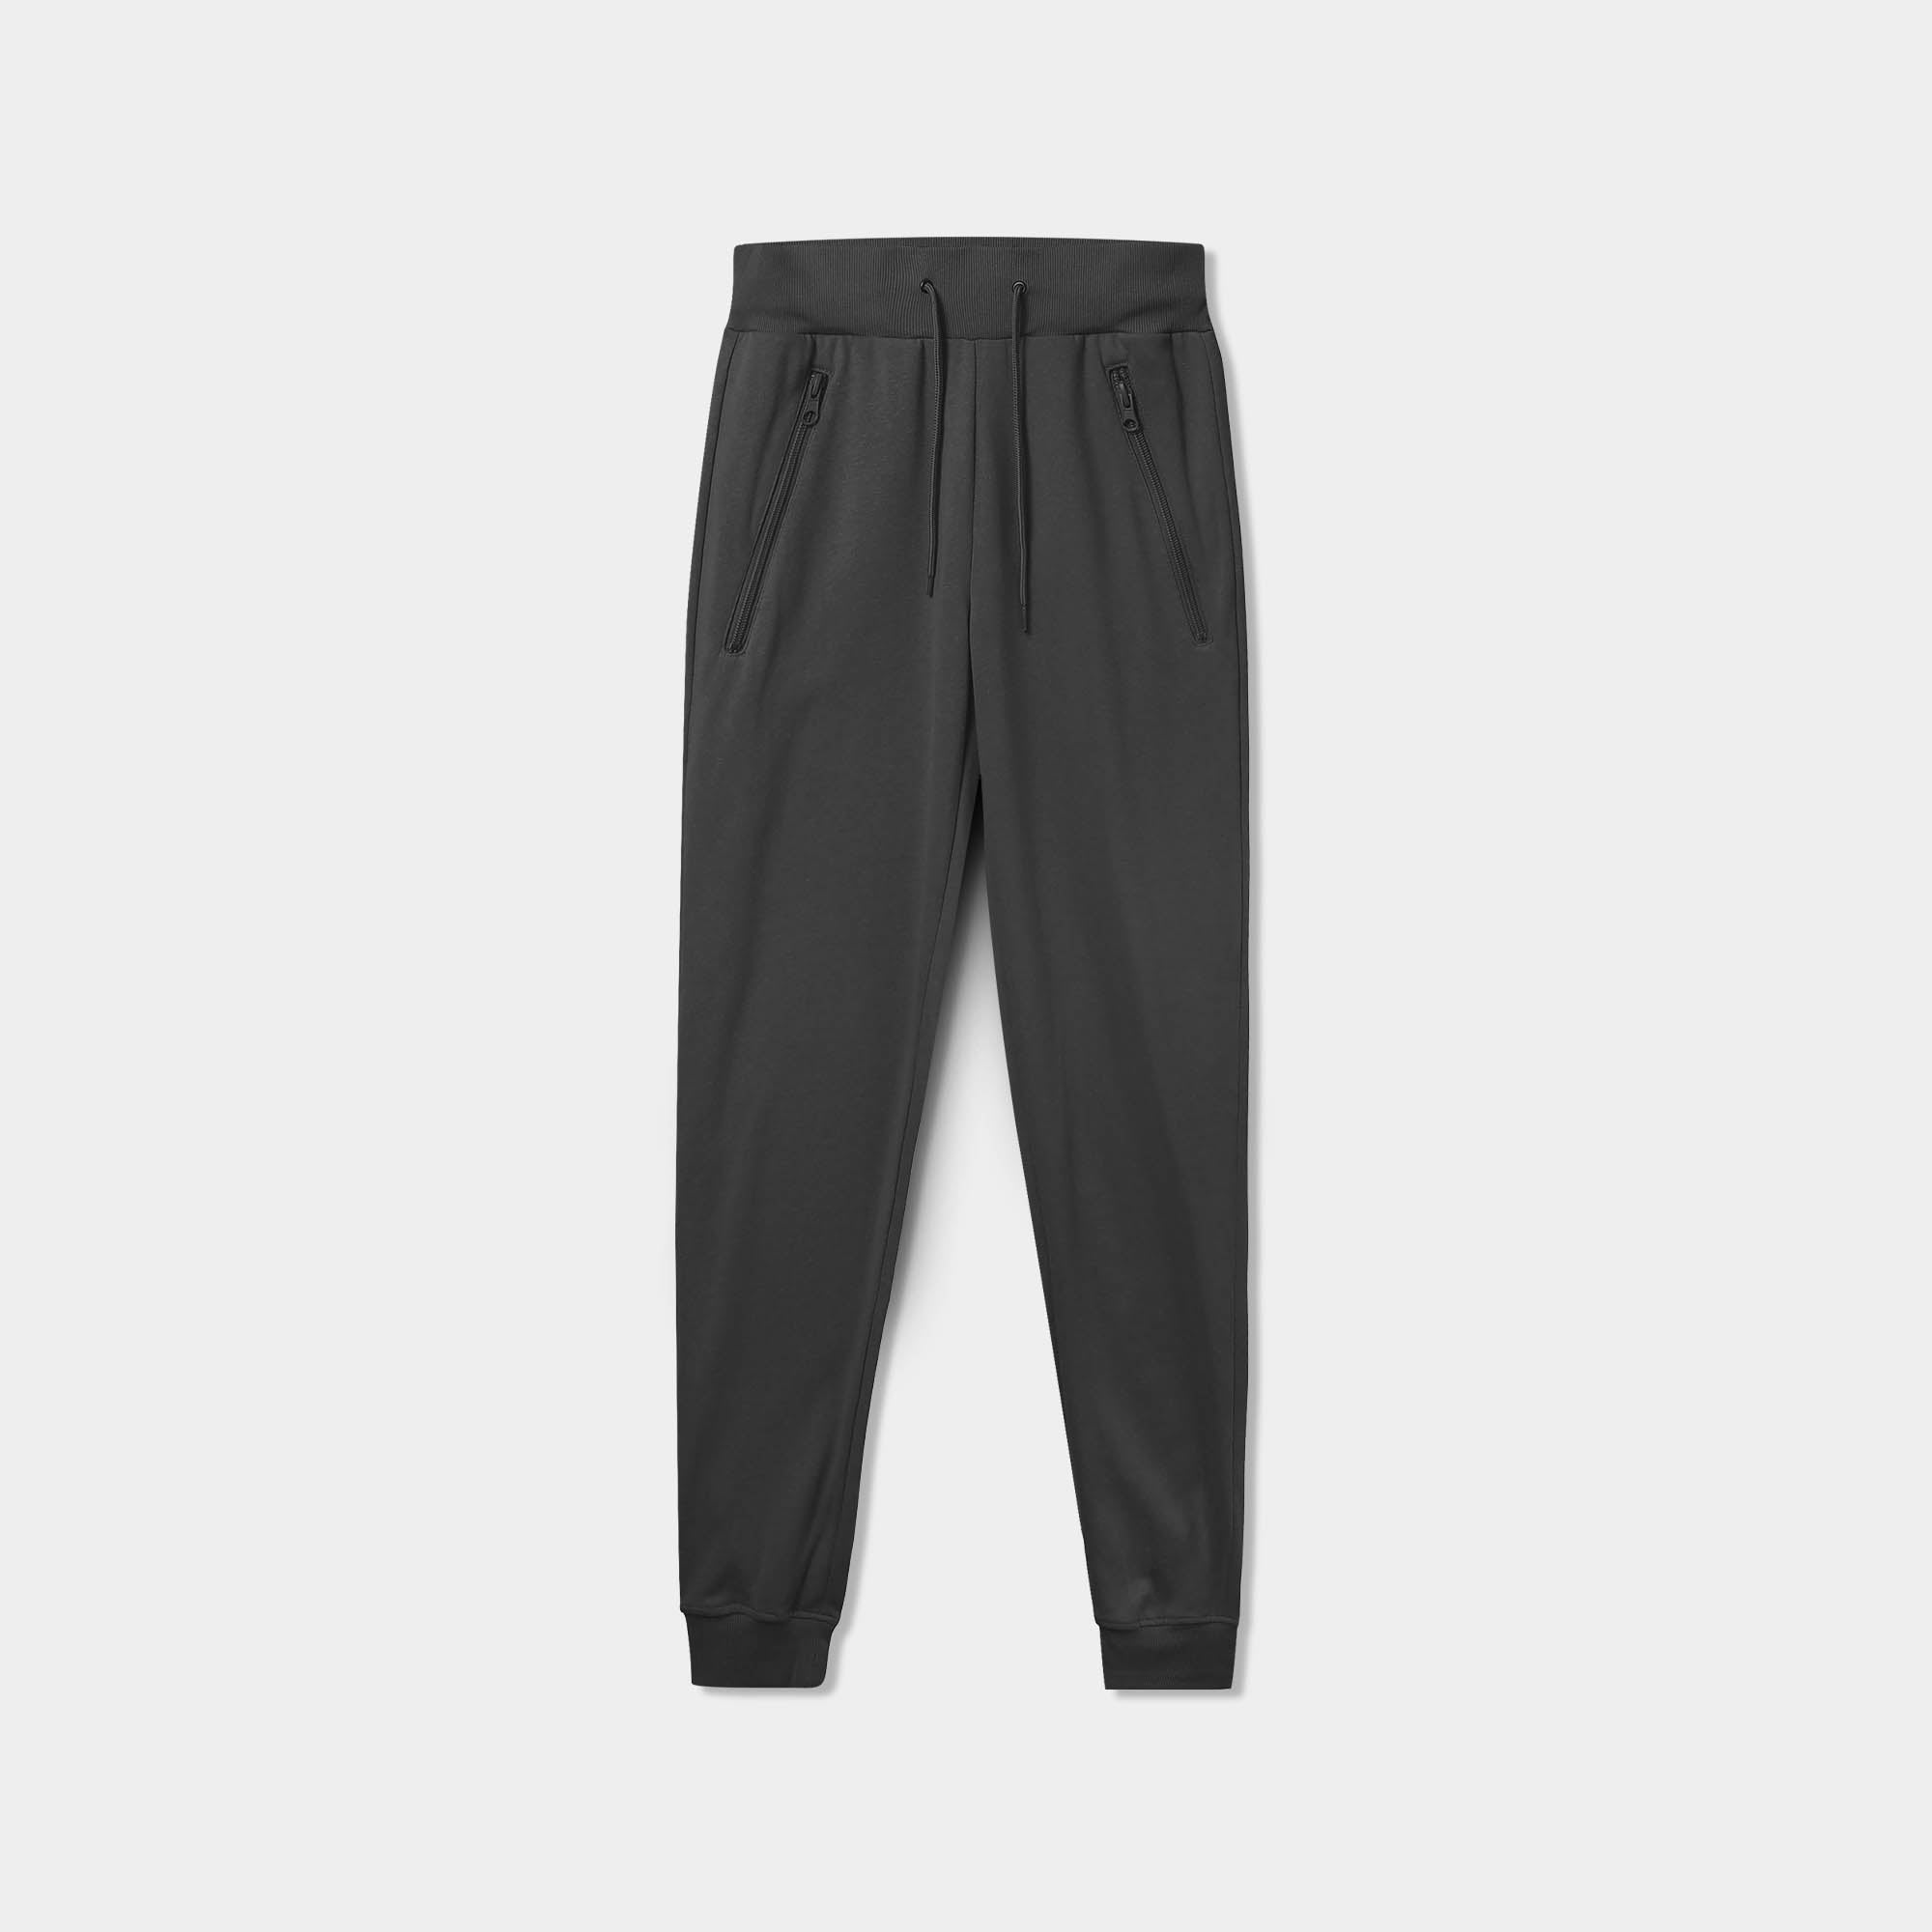 sweatpants with zipper pockets_sweatpants with zippers_men's sweatpants with zipper pockets_skinny jogger_mens skinny joggers_skinny sweatpants_boys skinny joggers_Charcoal